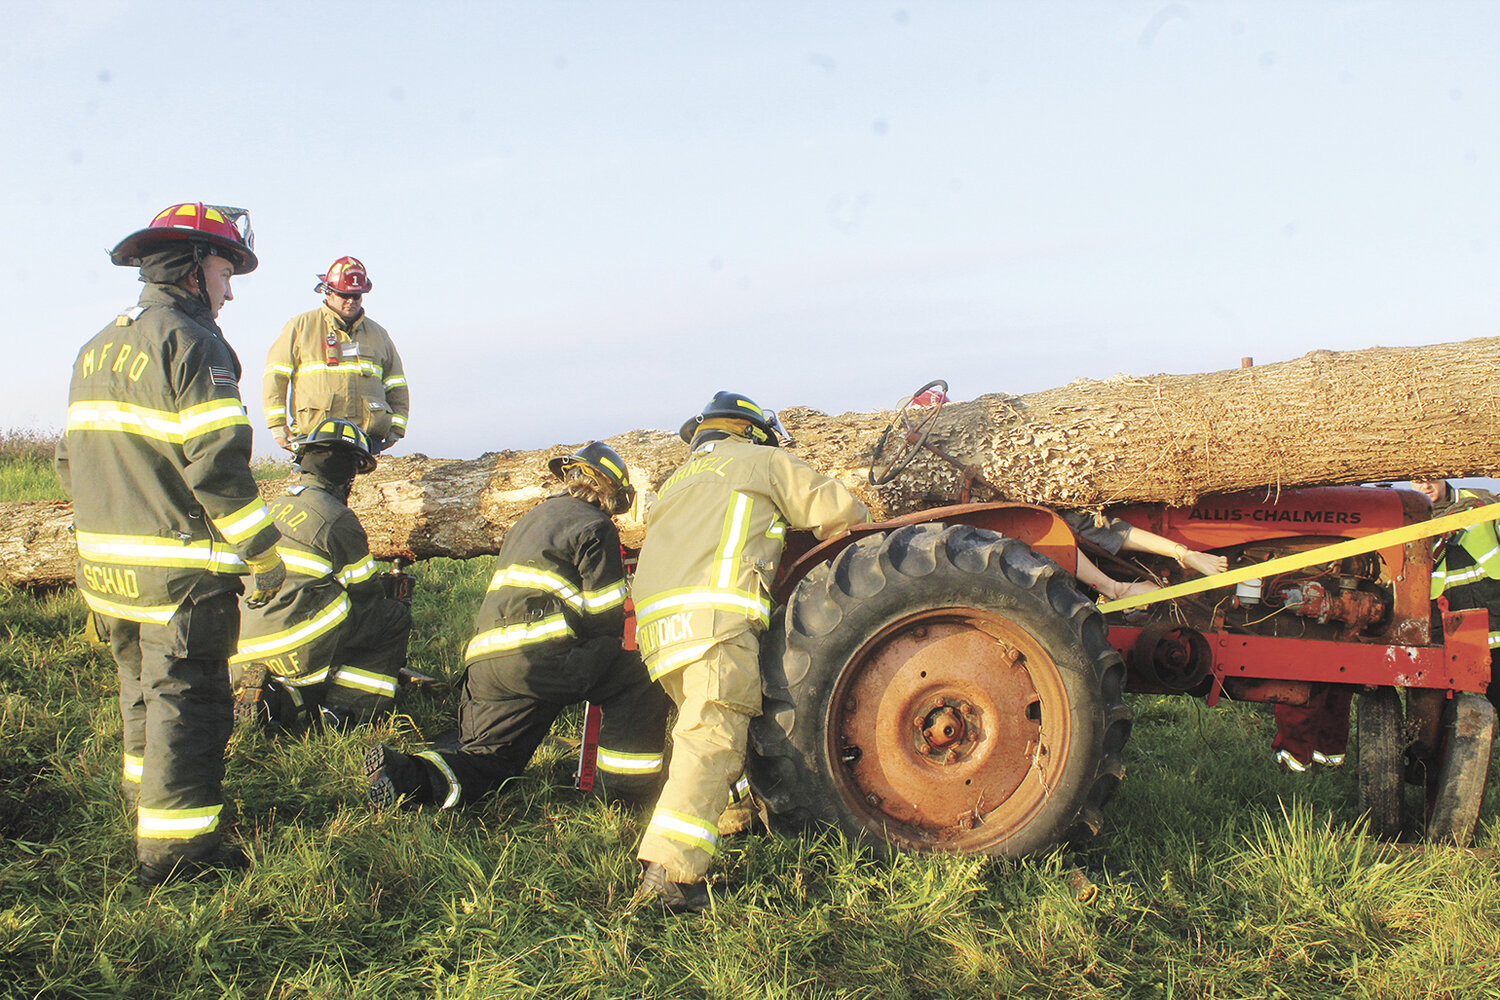 Emergency response personnel work to lift a tree off a victim in a rescue simulation at the Agricultural Response Training event held Oct. 21 at Heiman Holsteins in Marshfield, Wisconsin. The tree was lodged under the tractor’s steering wheel, further complicating the extrication.